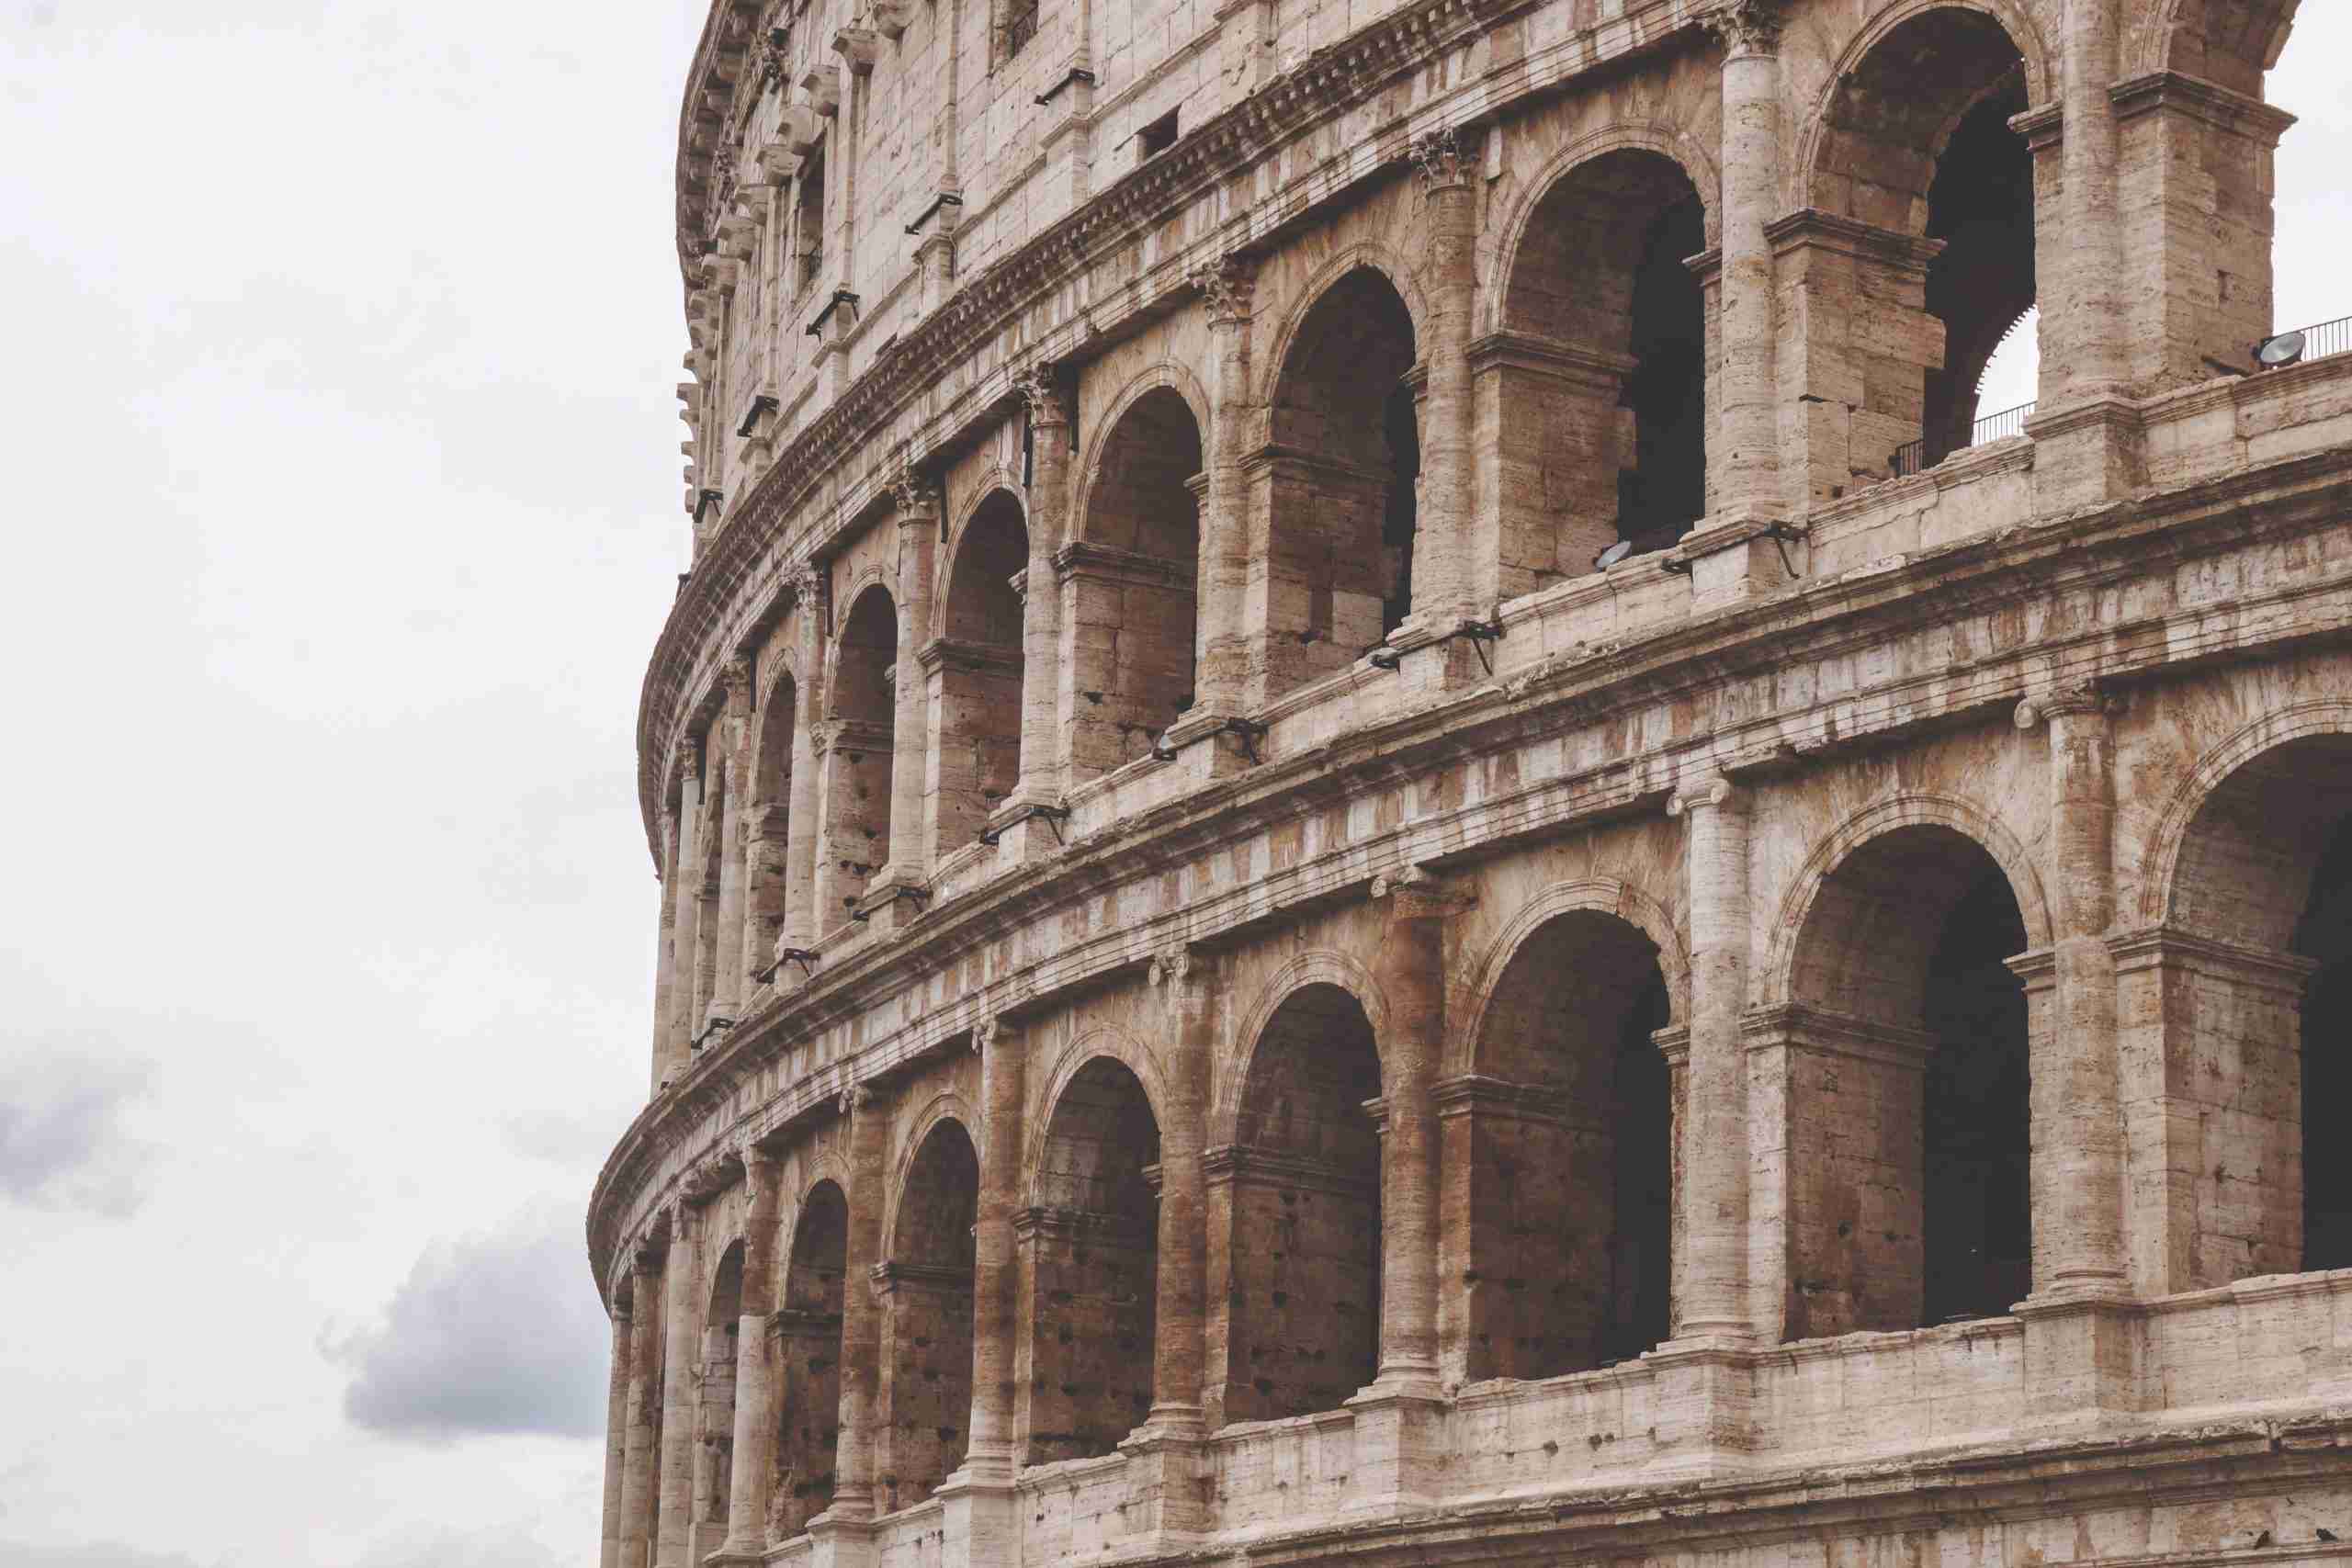 The Colosseum in Rome, one of the most famous precast concrete structures in history.